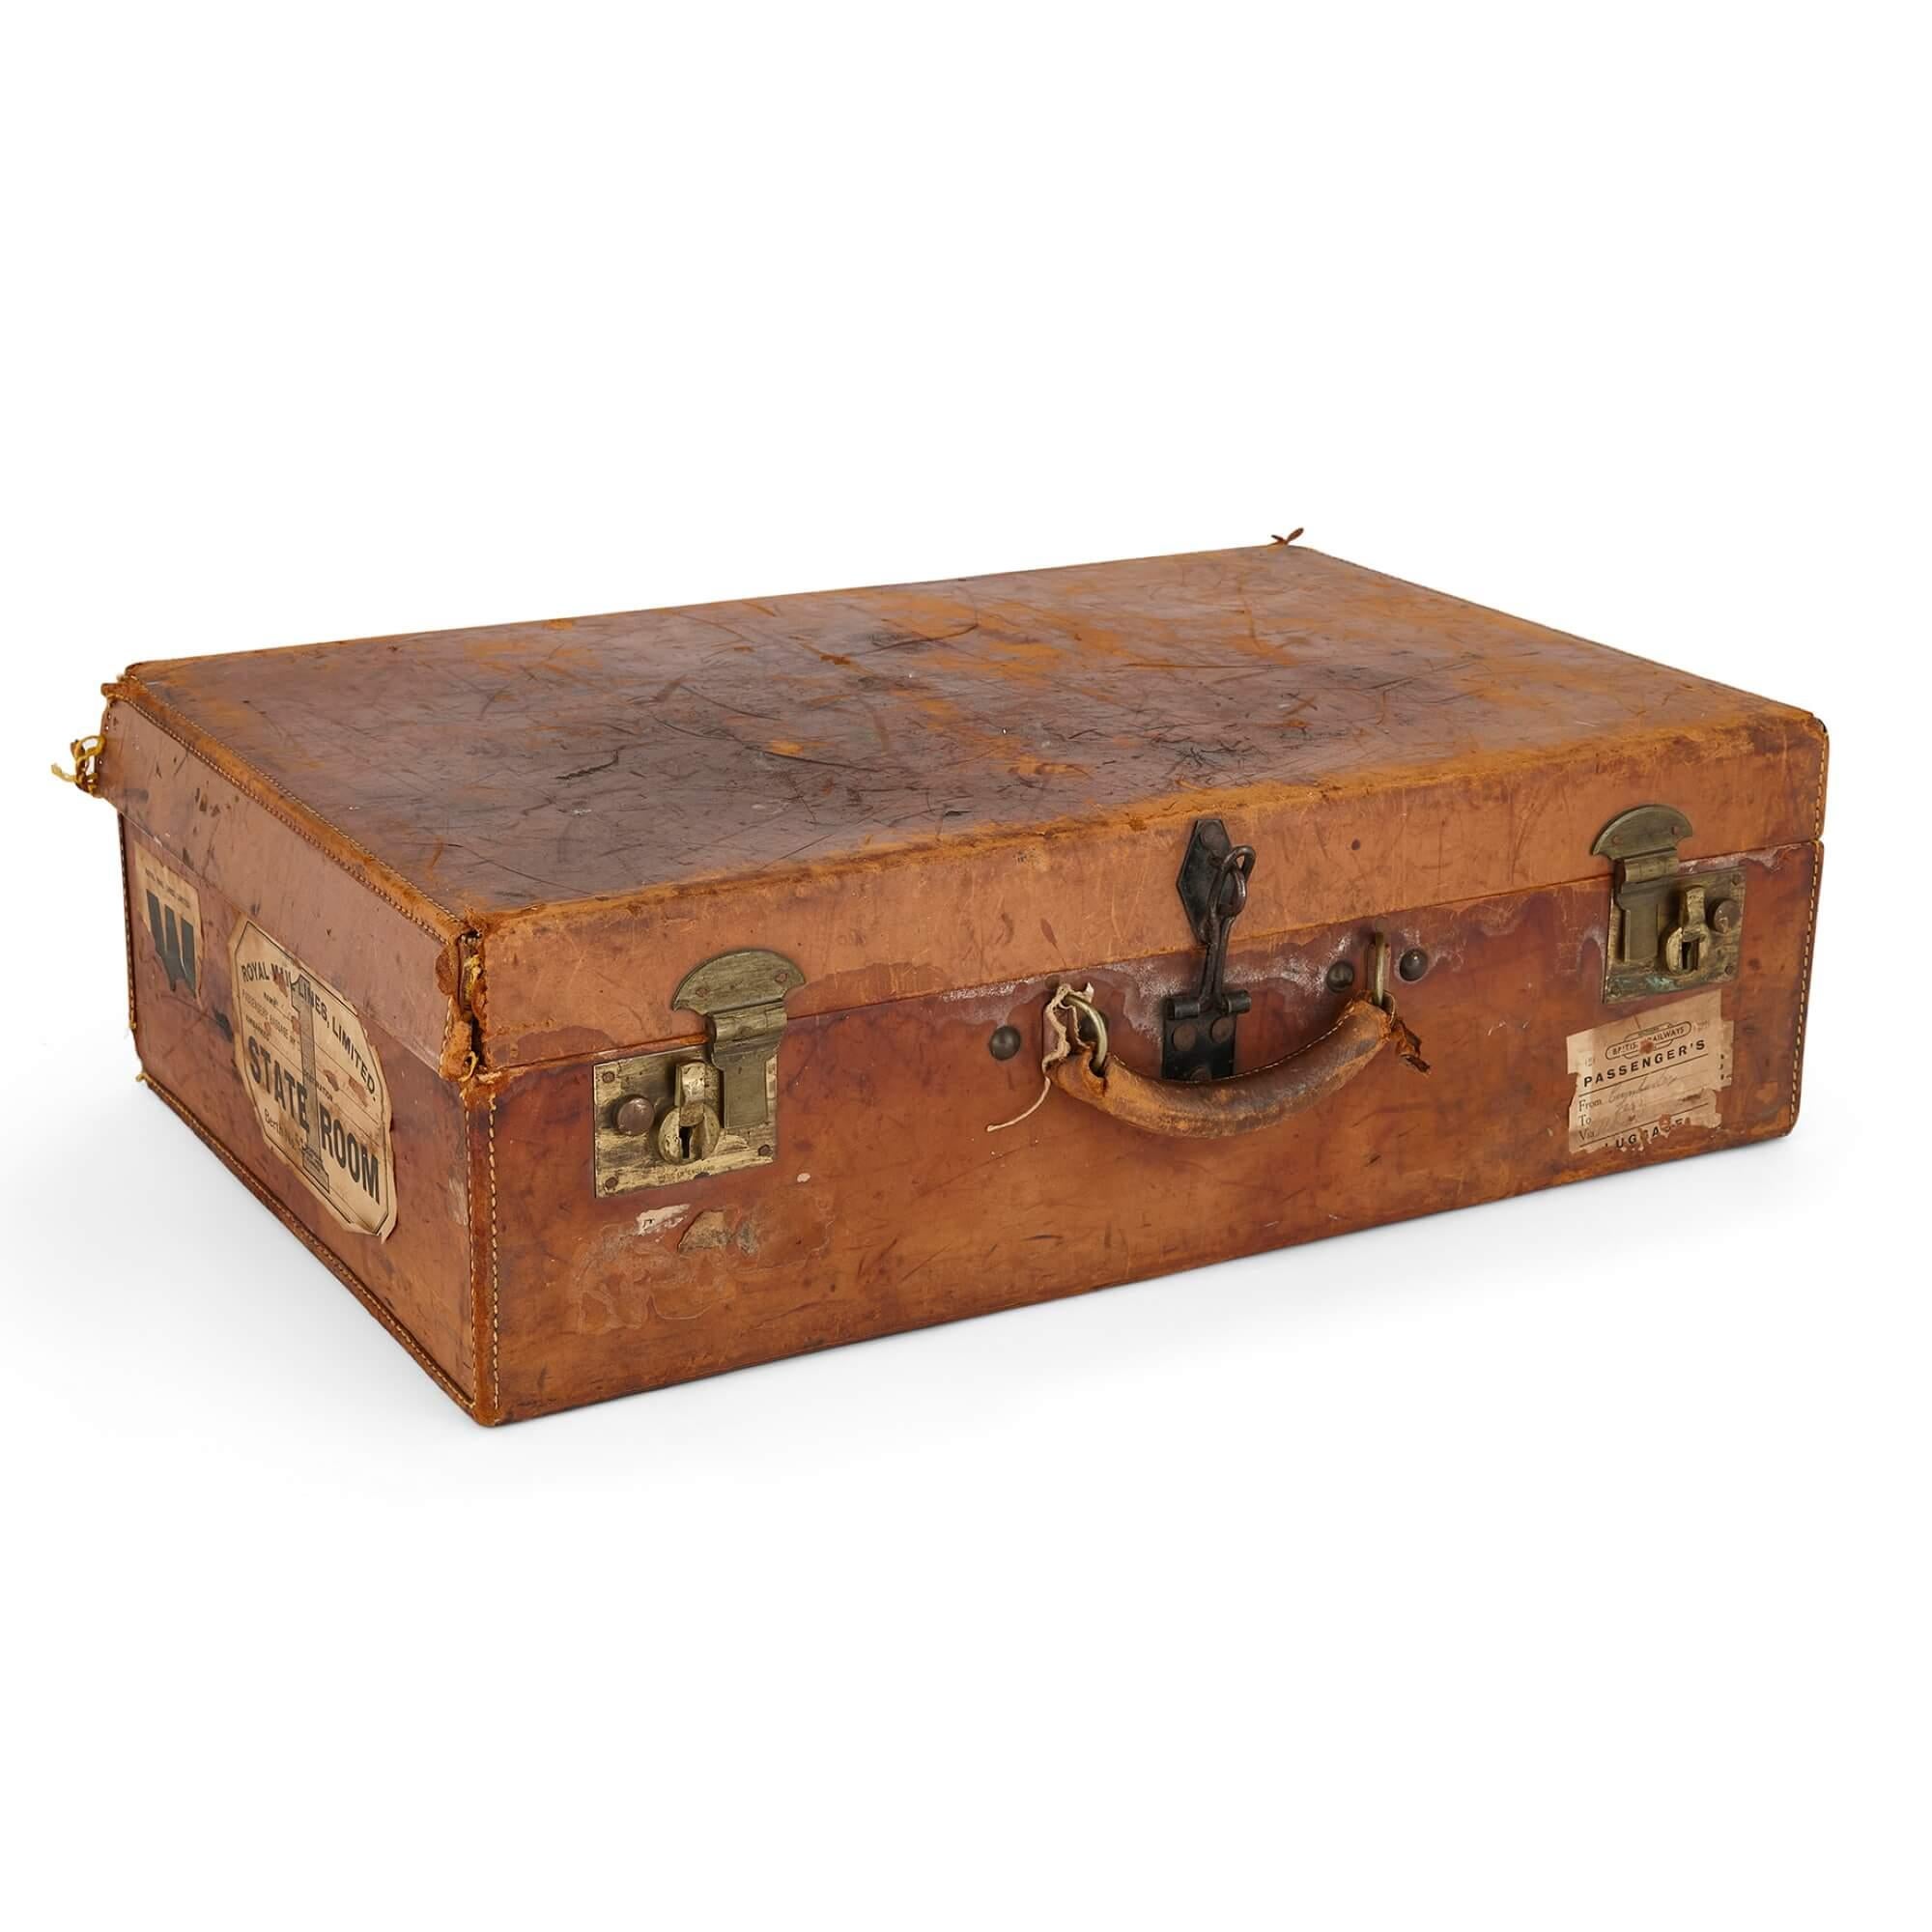 Collection of vintage luggage, a set of four English travel cases.
English, 20th Century
Green: height 18cm, width 67cm, depth 38cm.
Tan: height 18cm, width 53cm, depth 33cm.

Fascinating historical pieces, and fine objects that have stood the